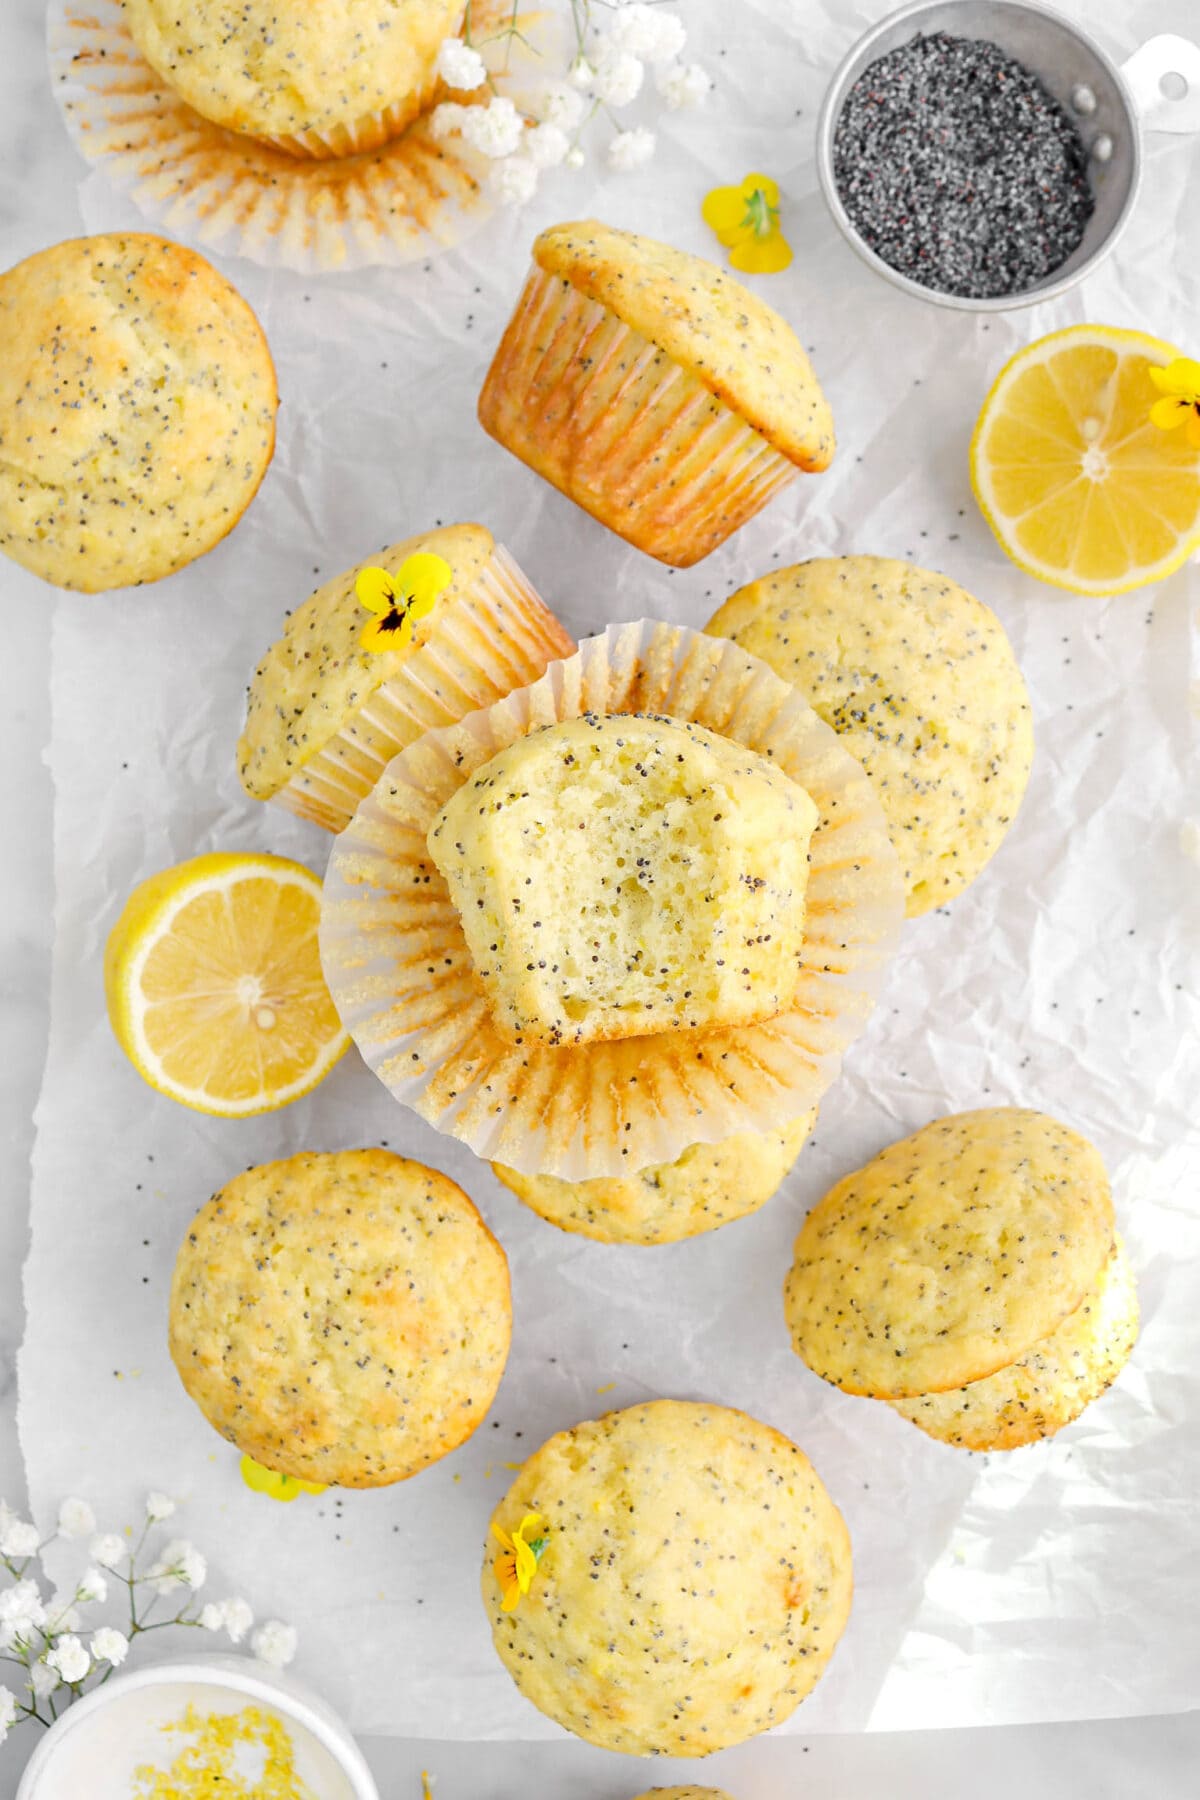 lemon poppy seed muffin on cupcake paper on top of more muffins with a bite missing, two lemon halves, yellow pansies, and white flowers around.